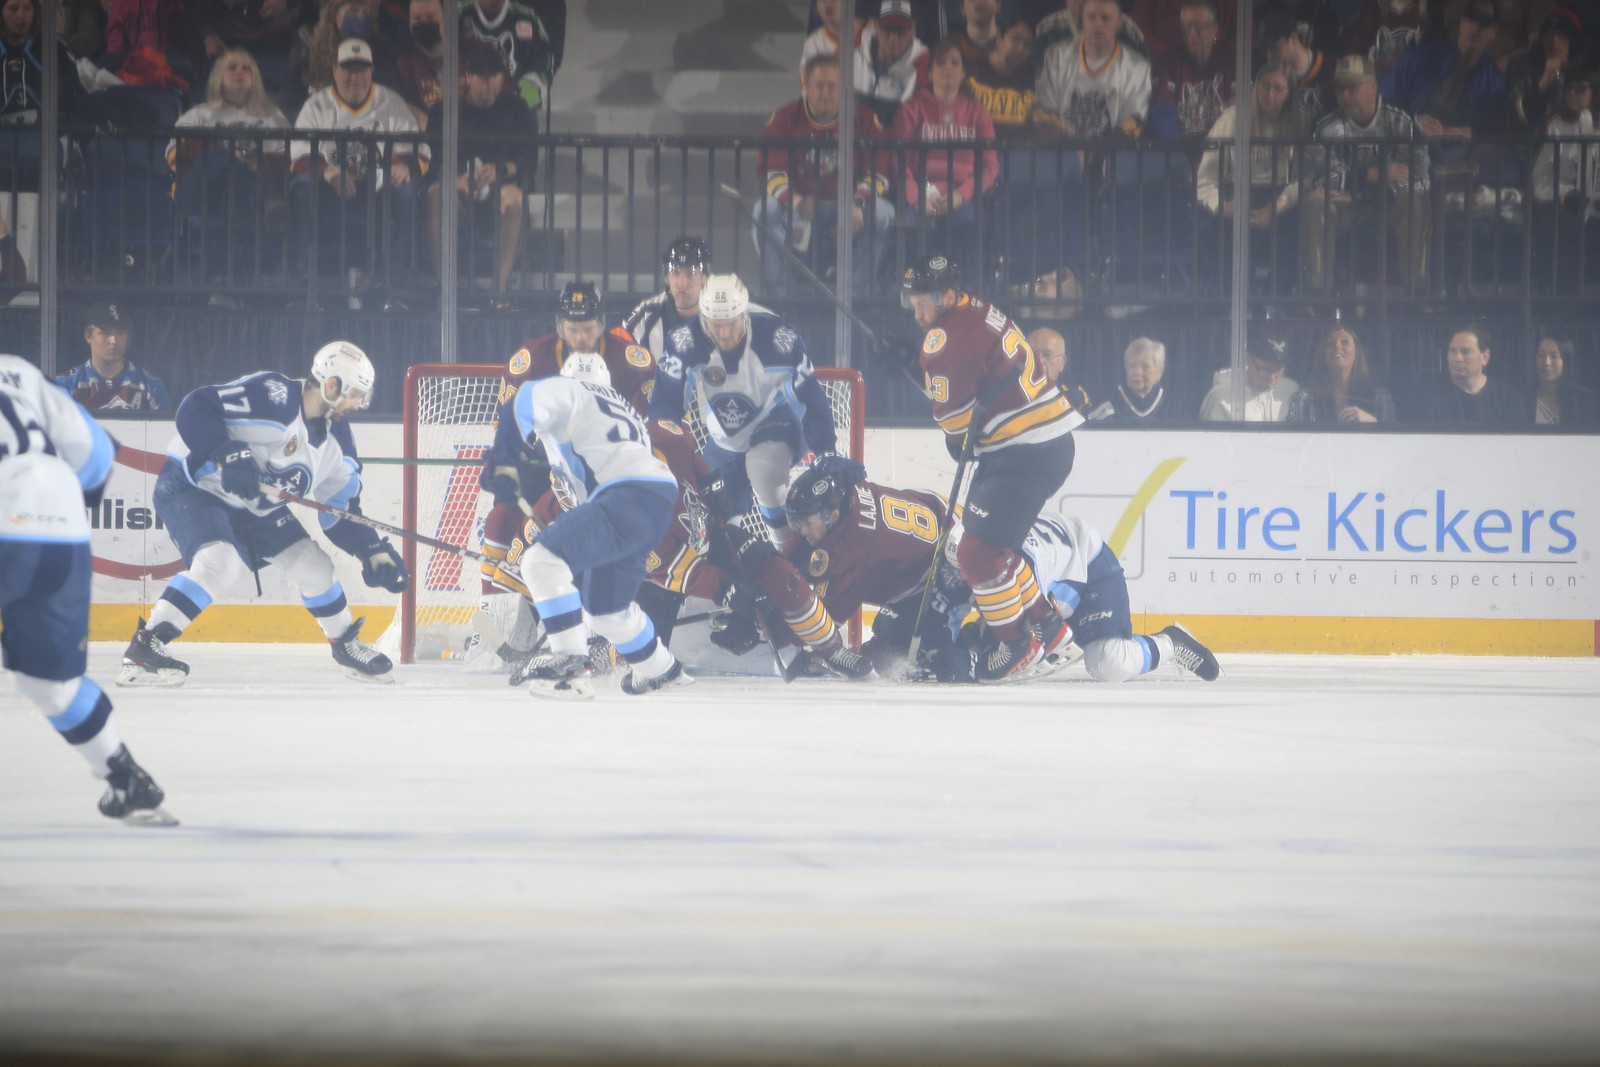 May 21, 2022 - Central Division Finals Game 1 vs. Milwaukee Admirals